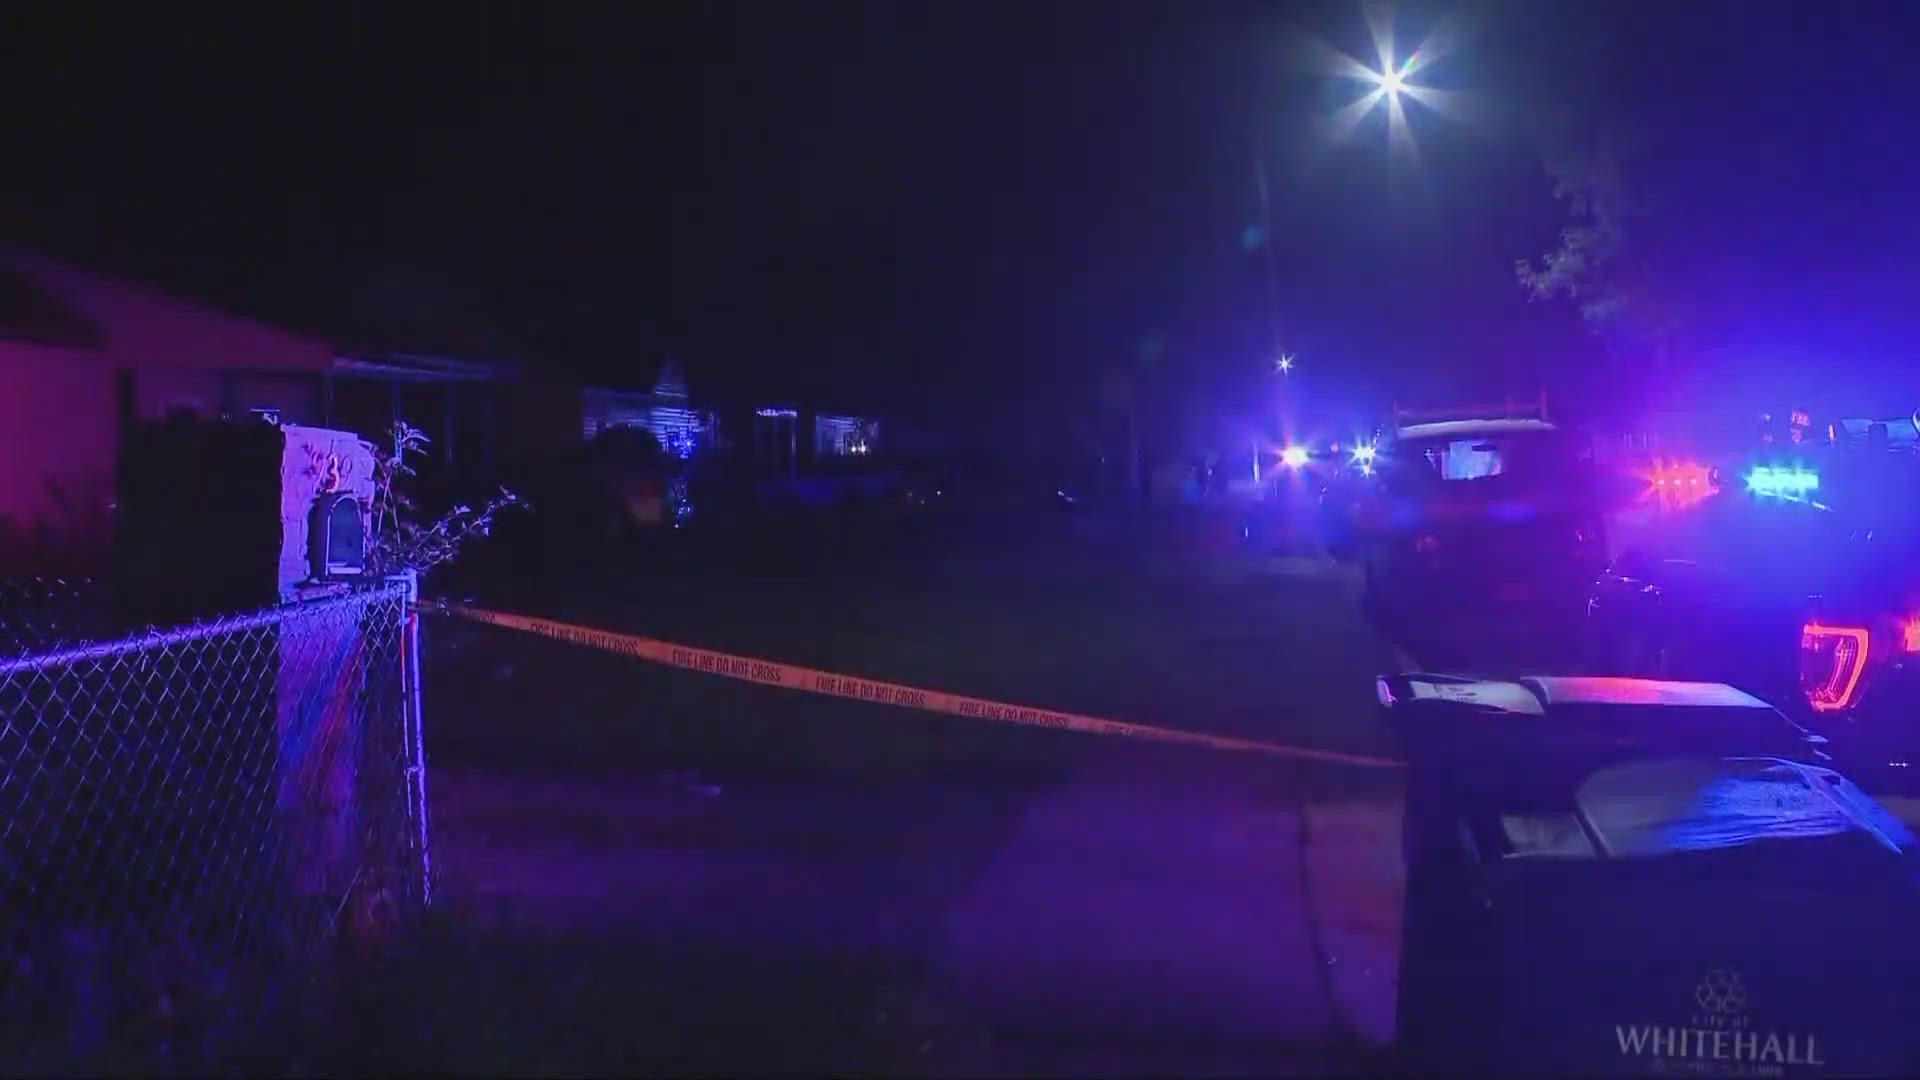 One person was shot and killed outside a home in Whitehall early Monday morning.